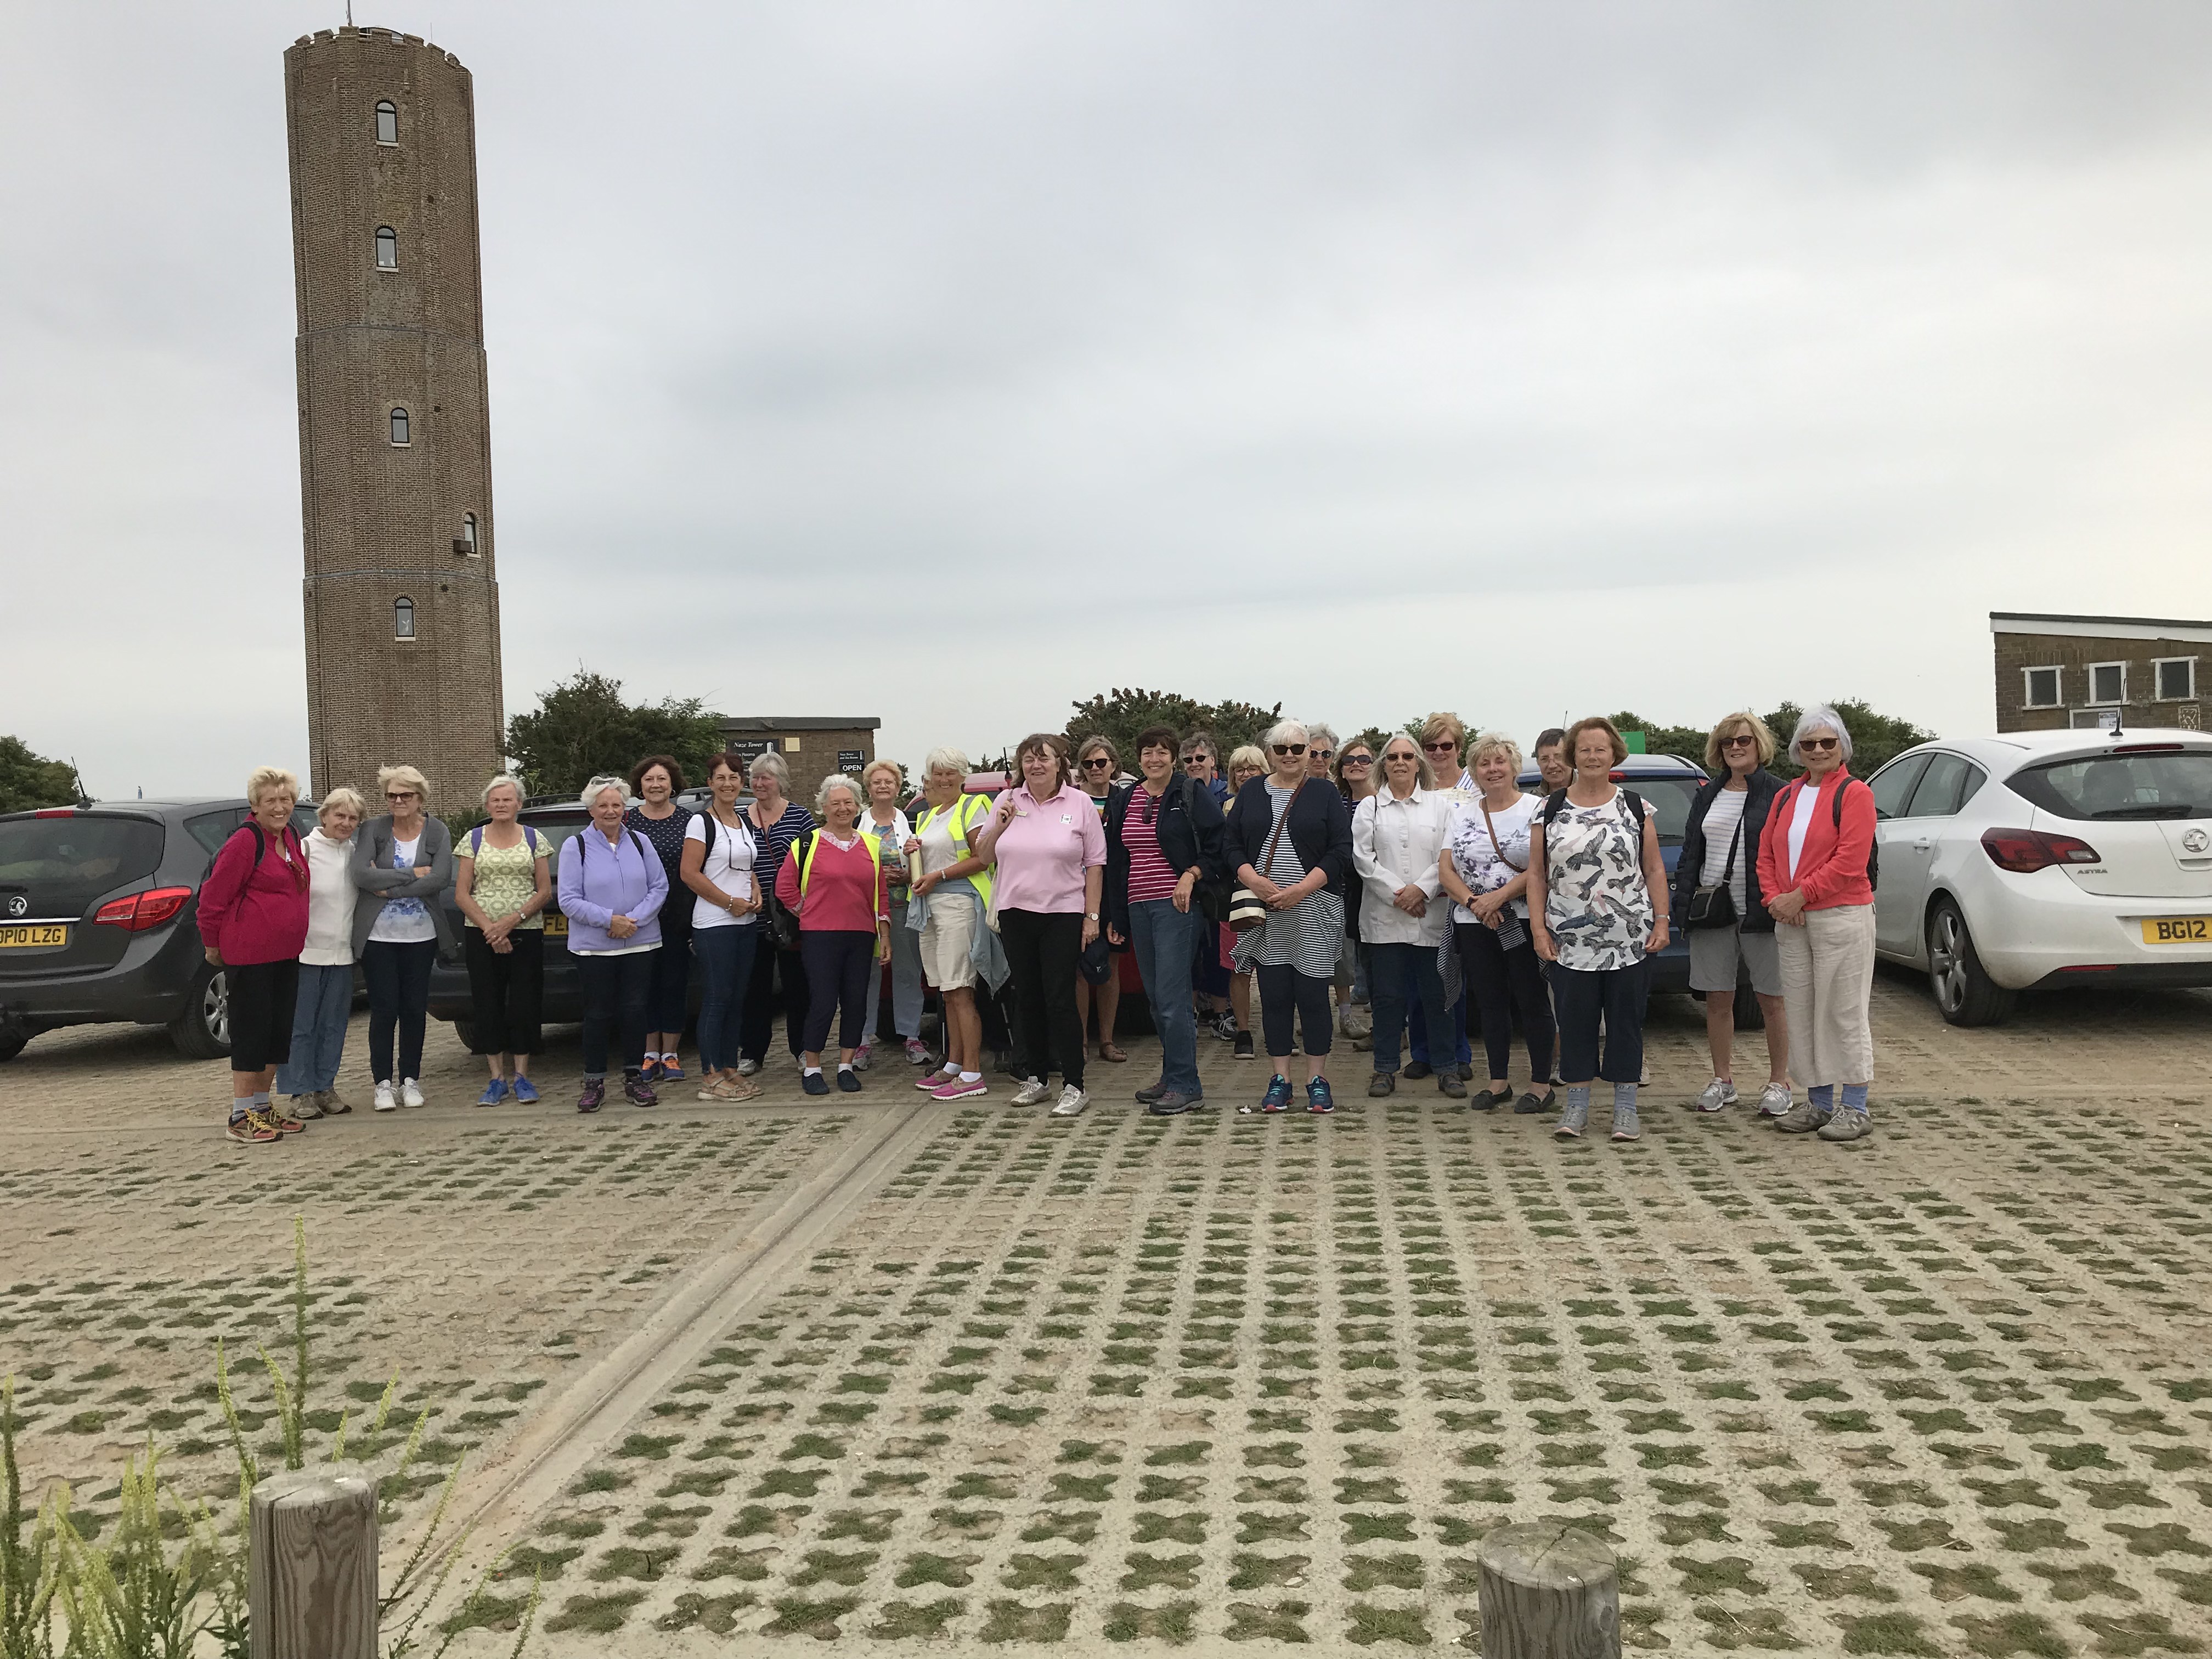 women exploring the naze tower in essex